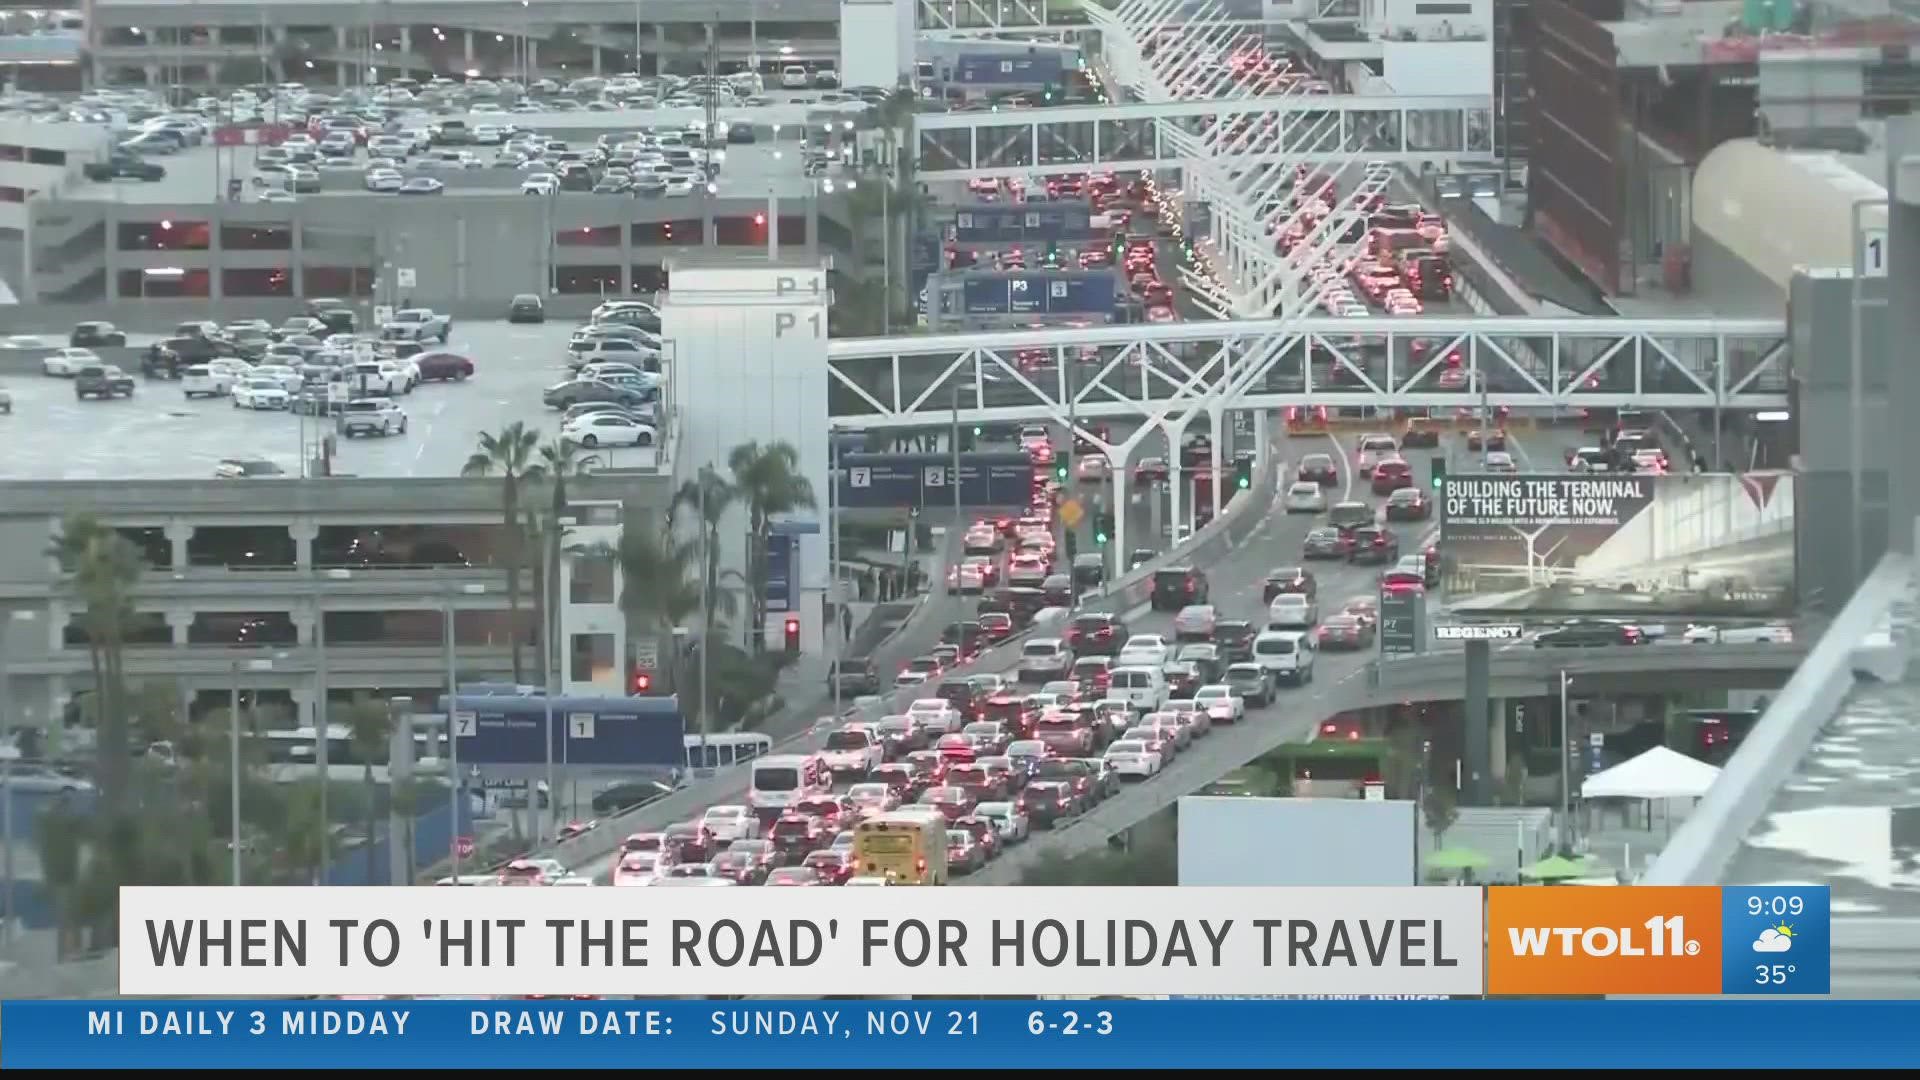 According to AAA, roughly 53.4 million people are expected to travel for the Thanksgiving holiday, up 13% from 2020.